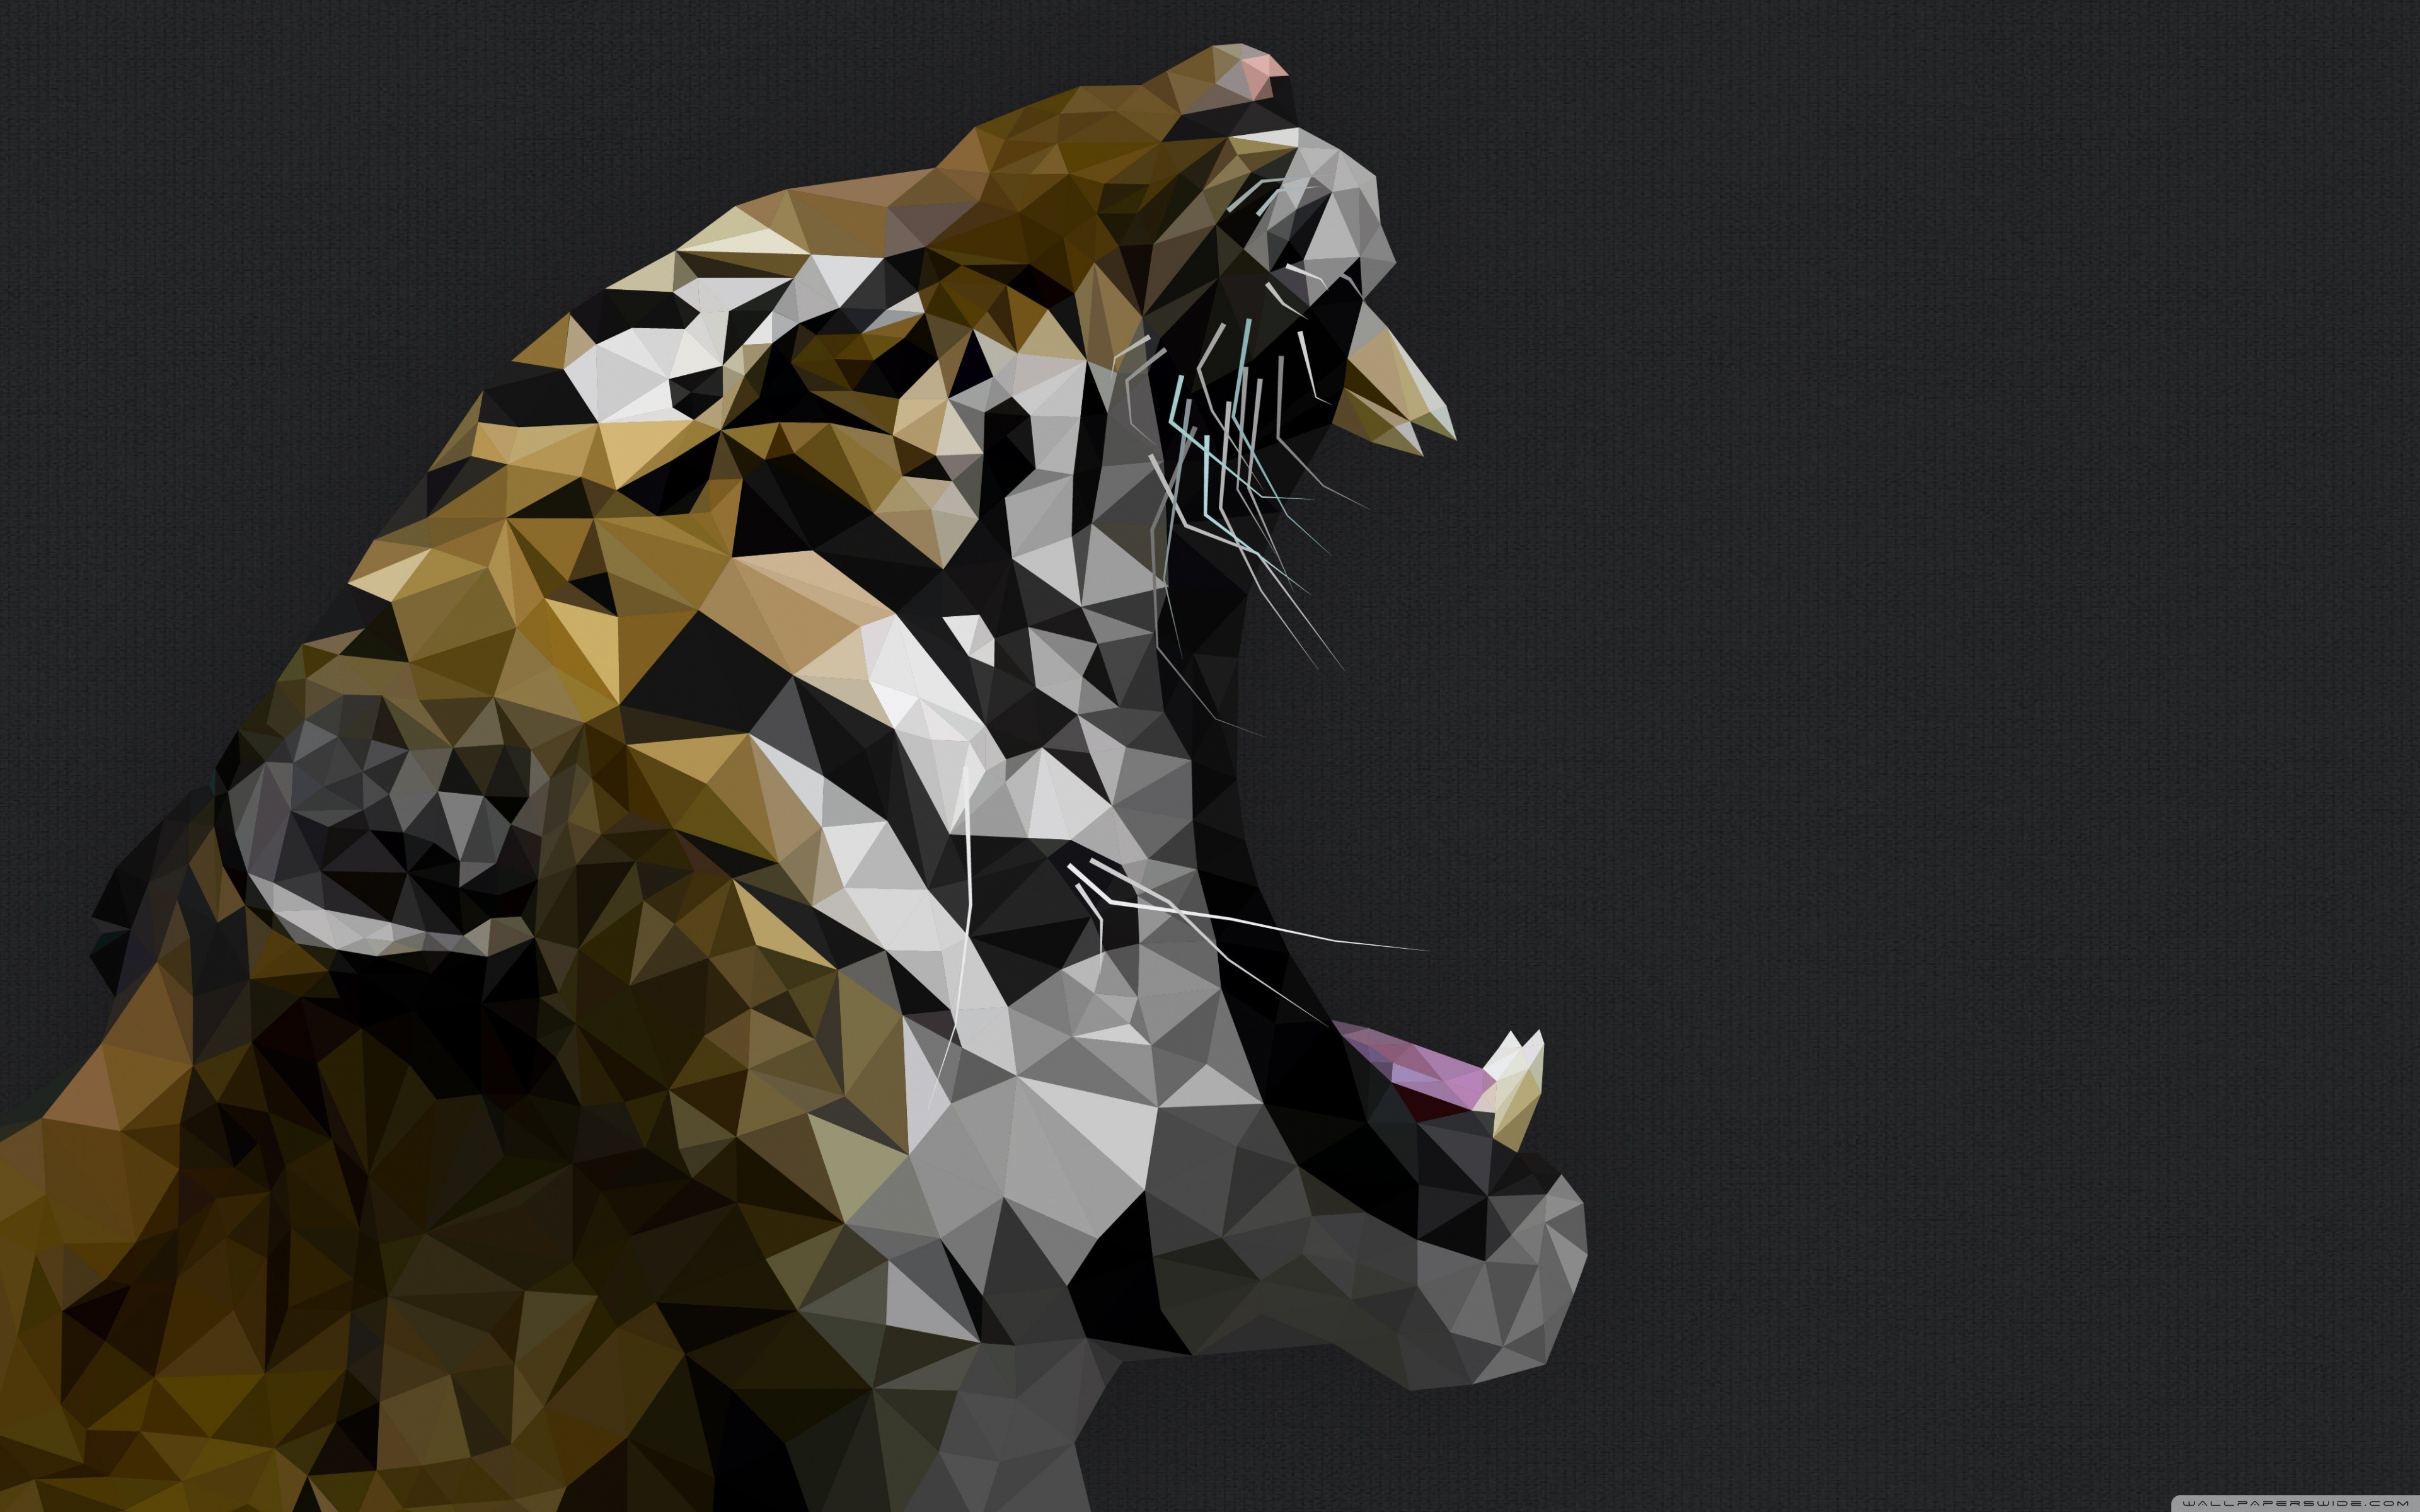 General 3840x2400 tiger animals low poly simple background big cats artwork digital art mammals black background fangs